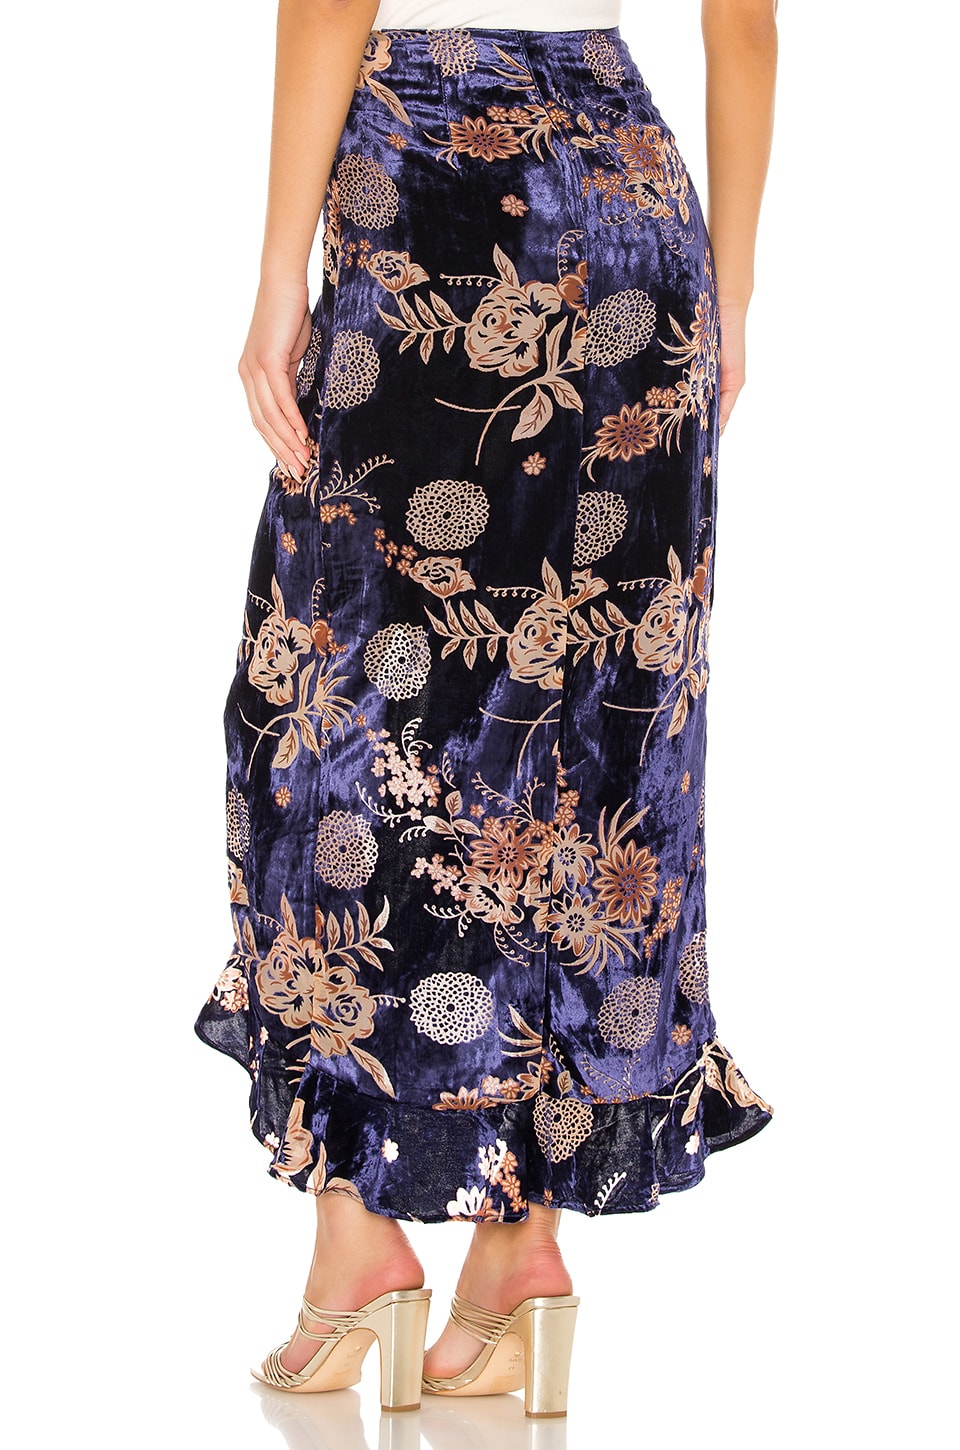 House of Harlow 1960 x REVOLVE Ferris Maxi Skirt in Navy Floral Multi ...